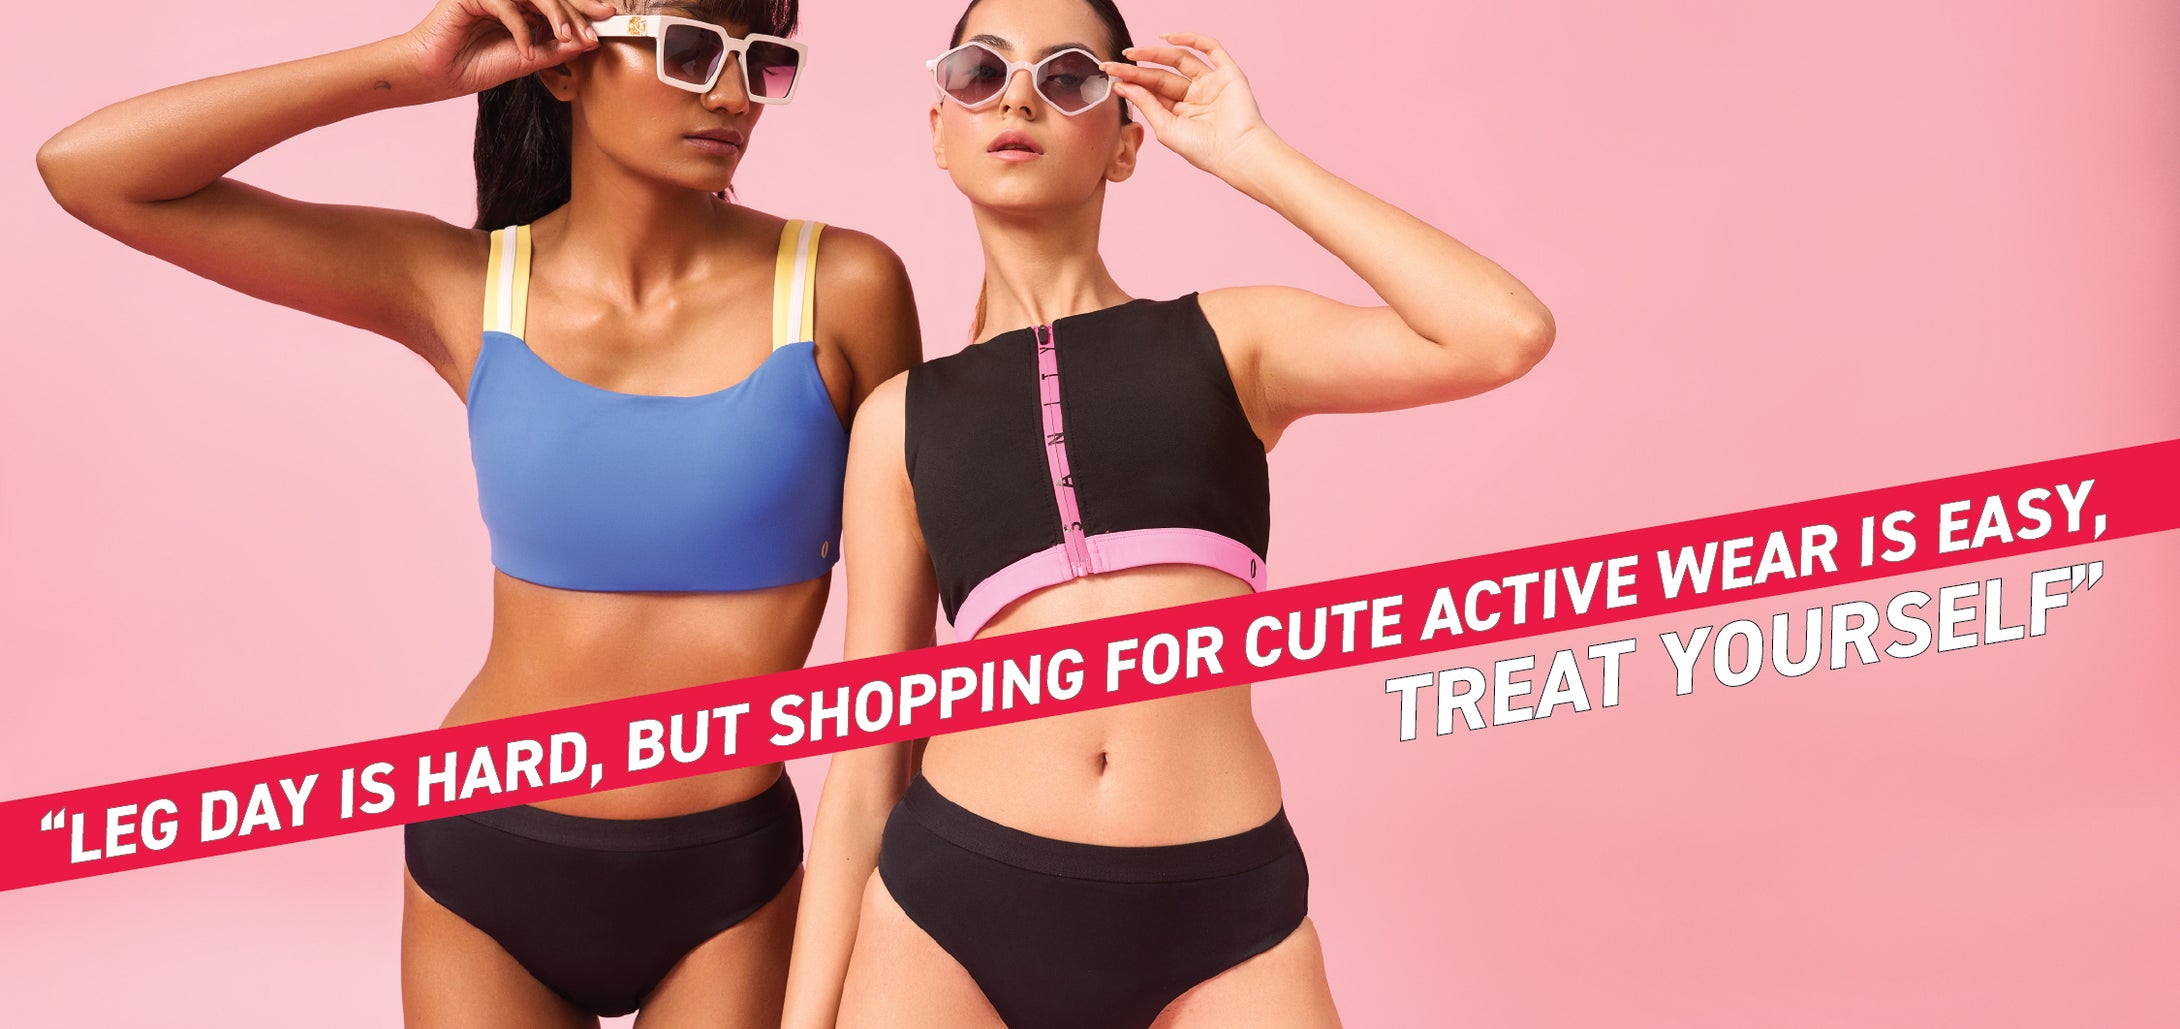 Women's Activewear and Athleisure